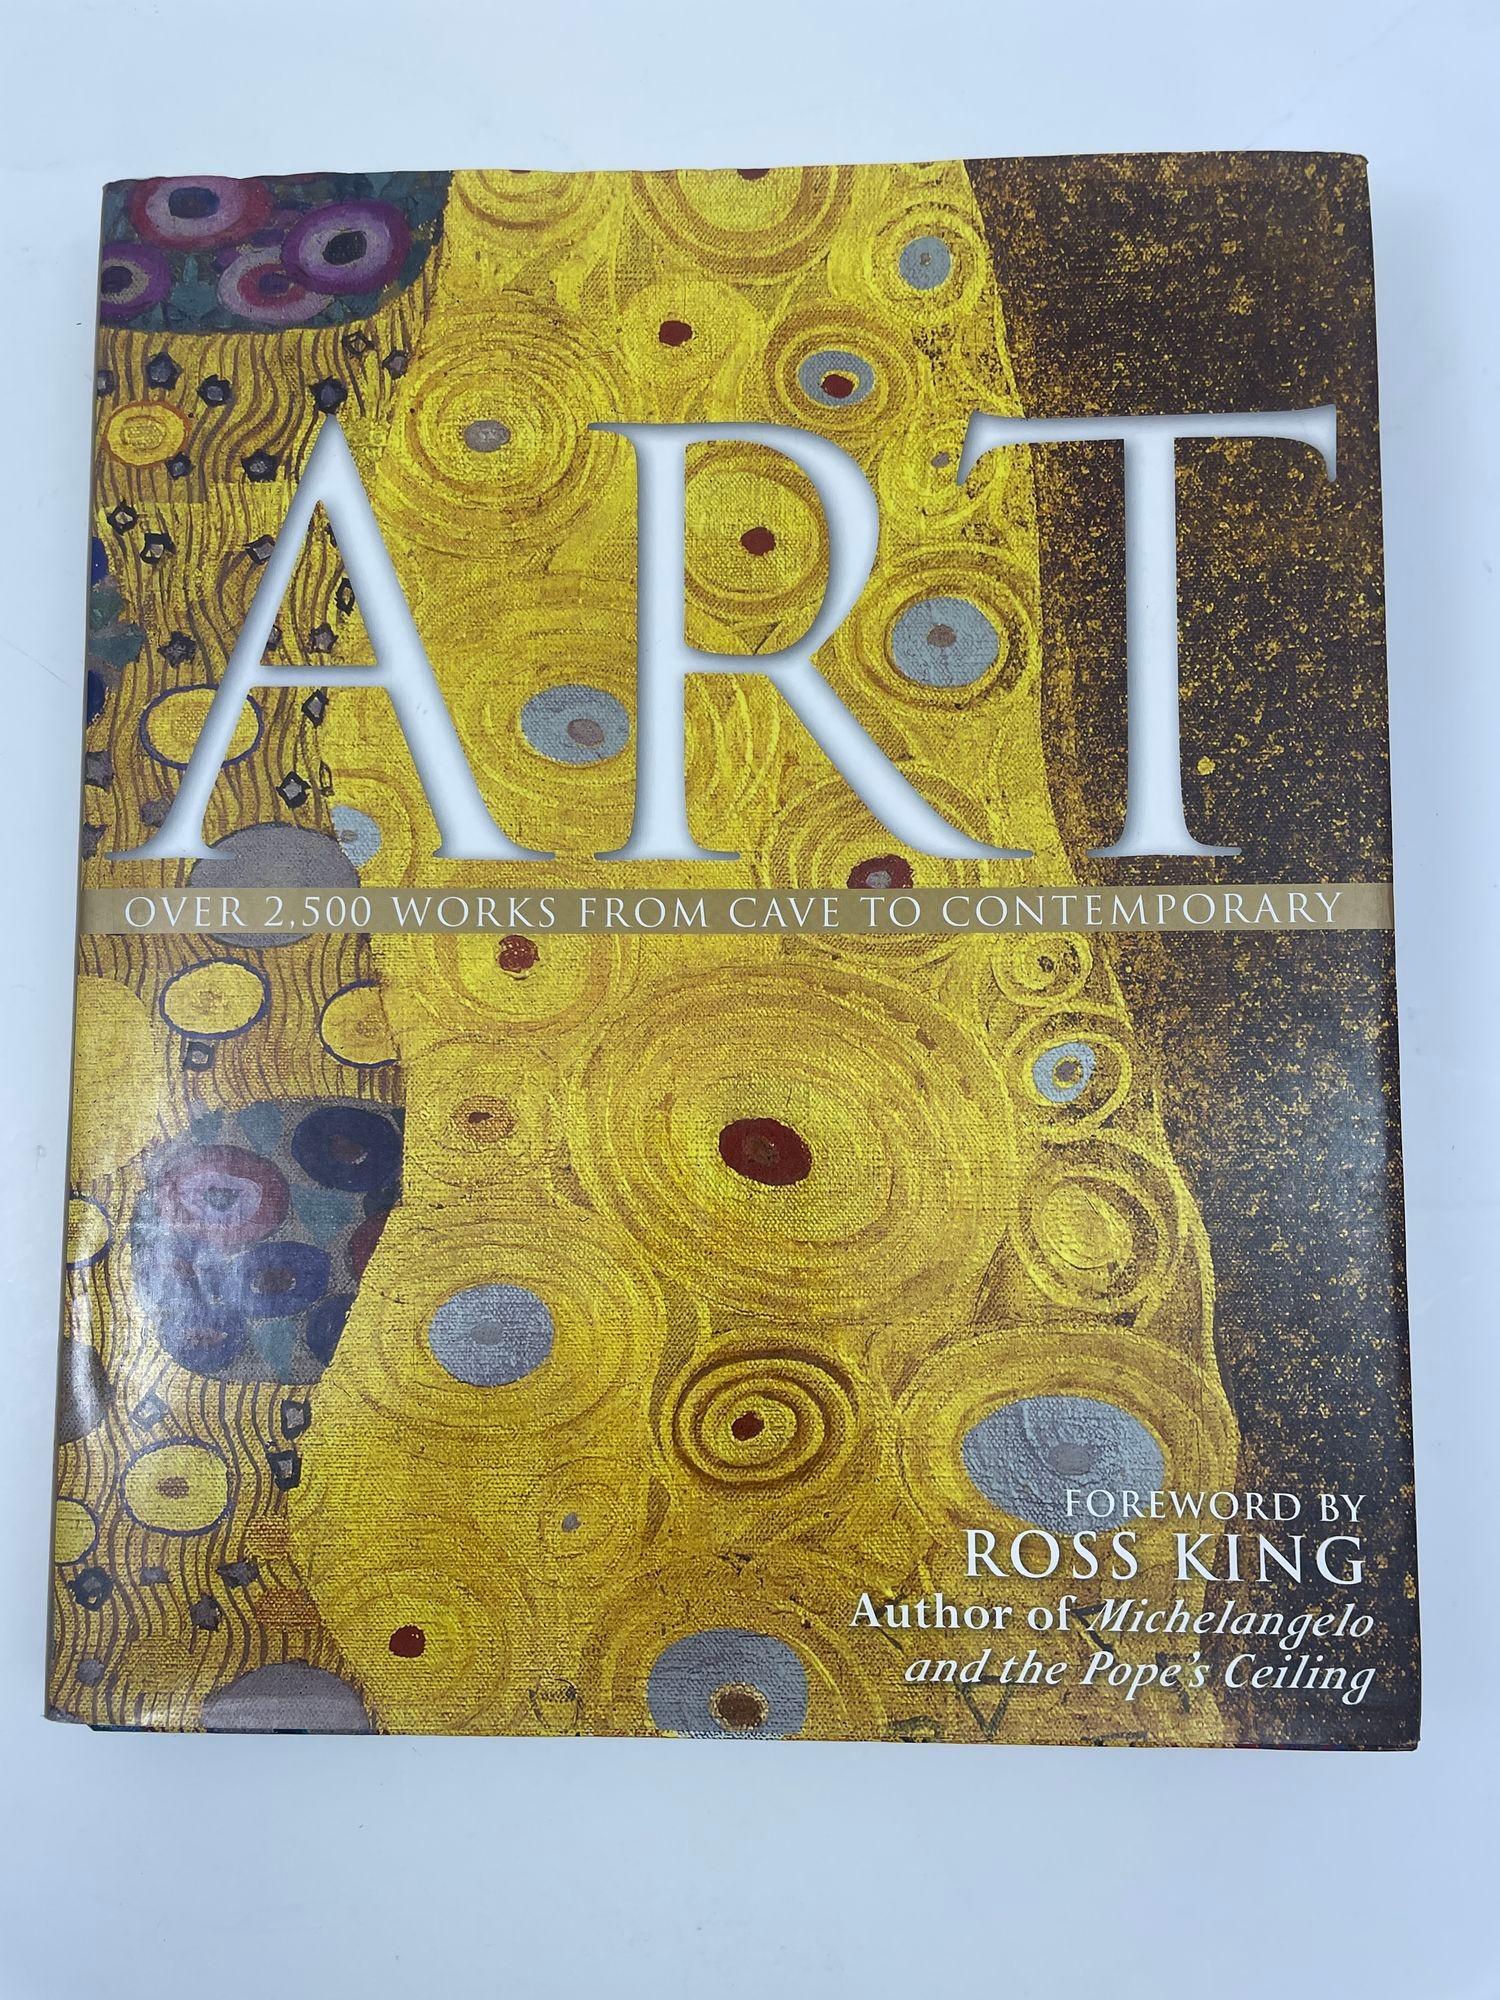 Art: Over 2500 Works from Cave to Contemporary by Nigel Ritchie Hardback Book. 2008.The definitive visual guide to over 2,500 paintings and sculptures from around the world, from prehistory to the 21st century. Accessible, engaging, and thoroughly